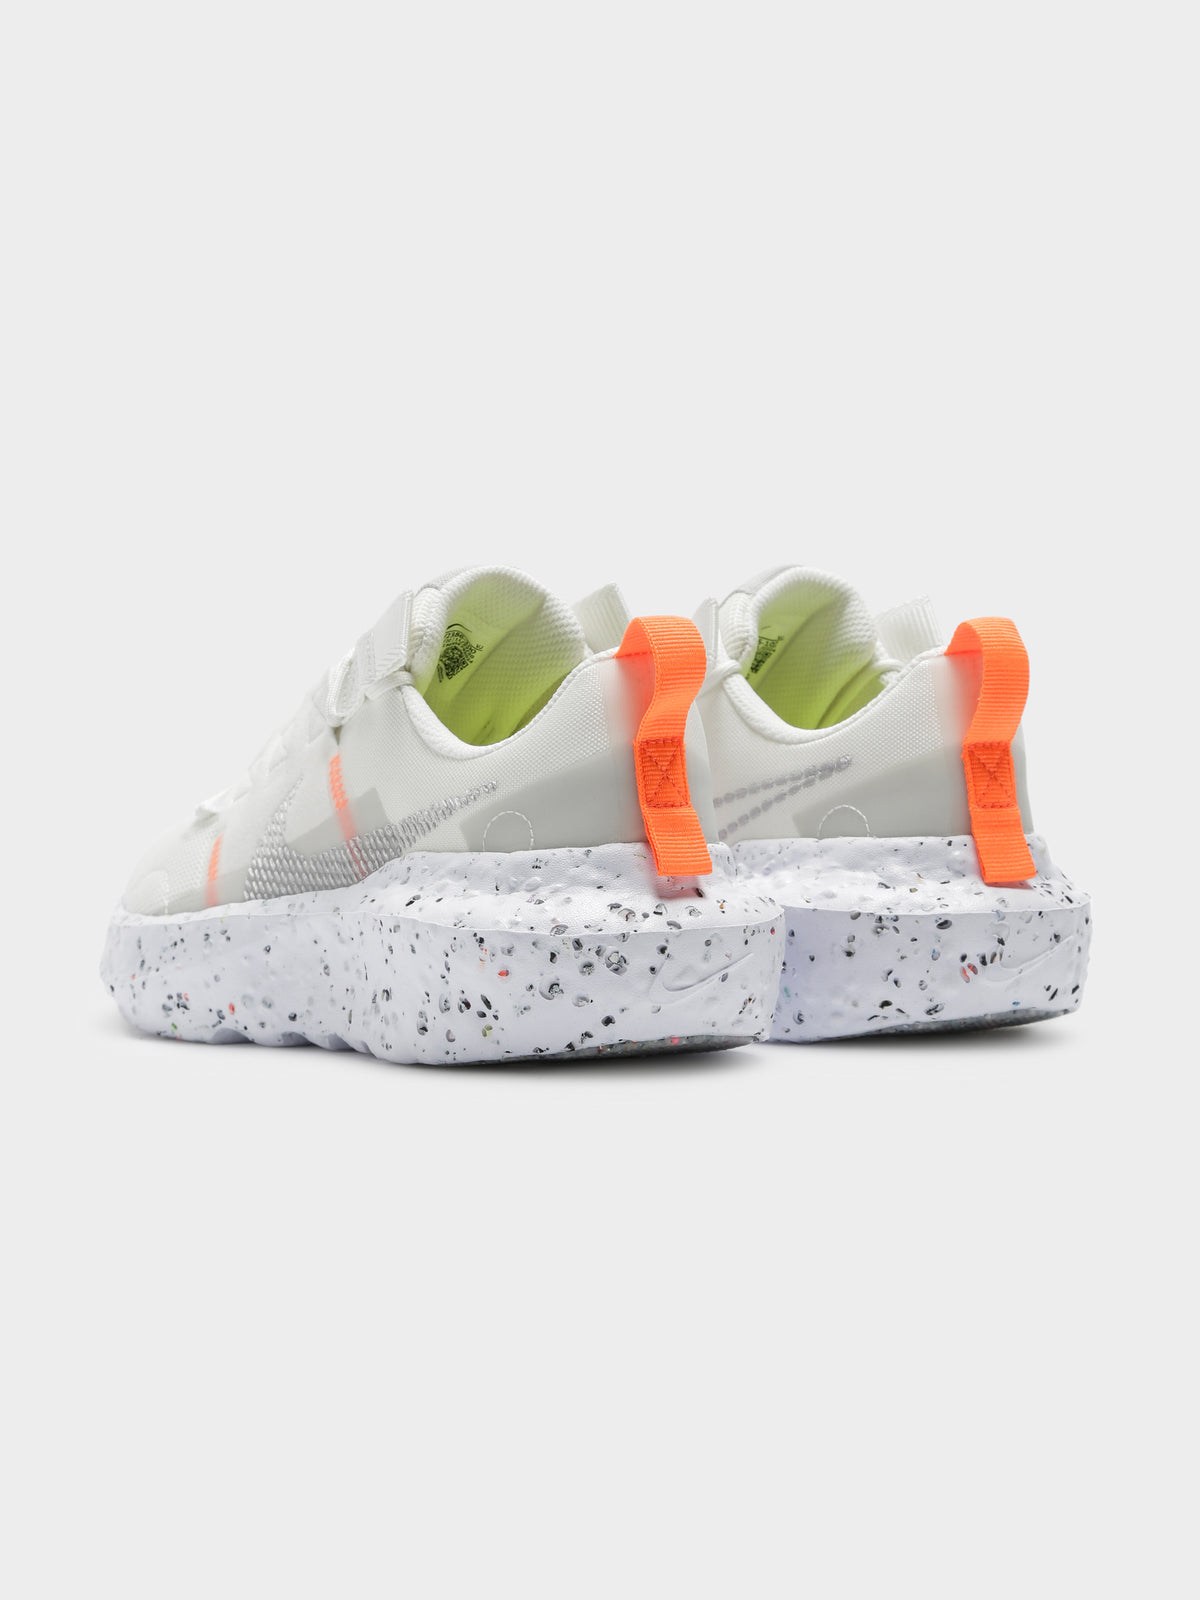 Womens Crater Impact Sneakers in Summit White